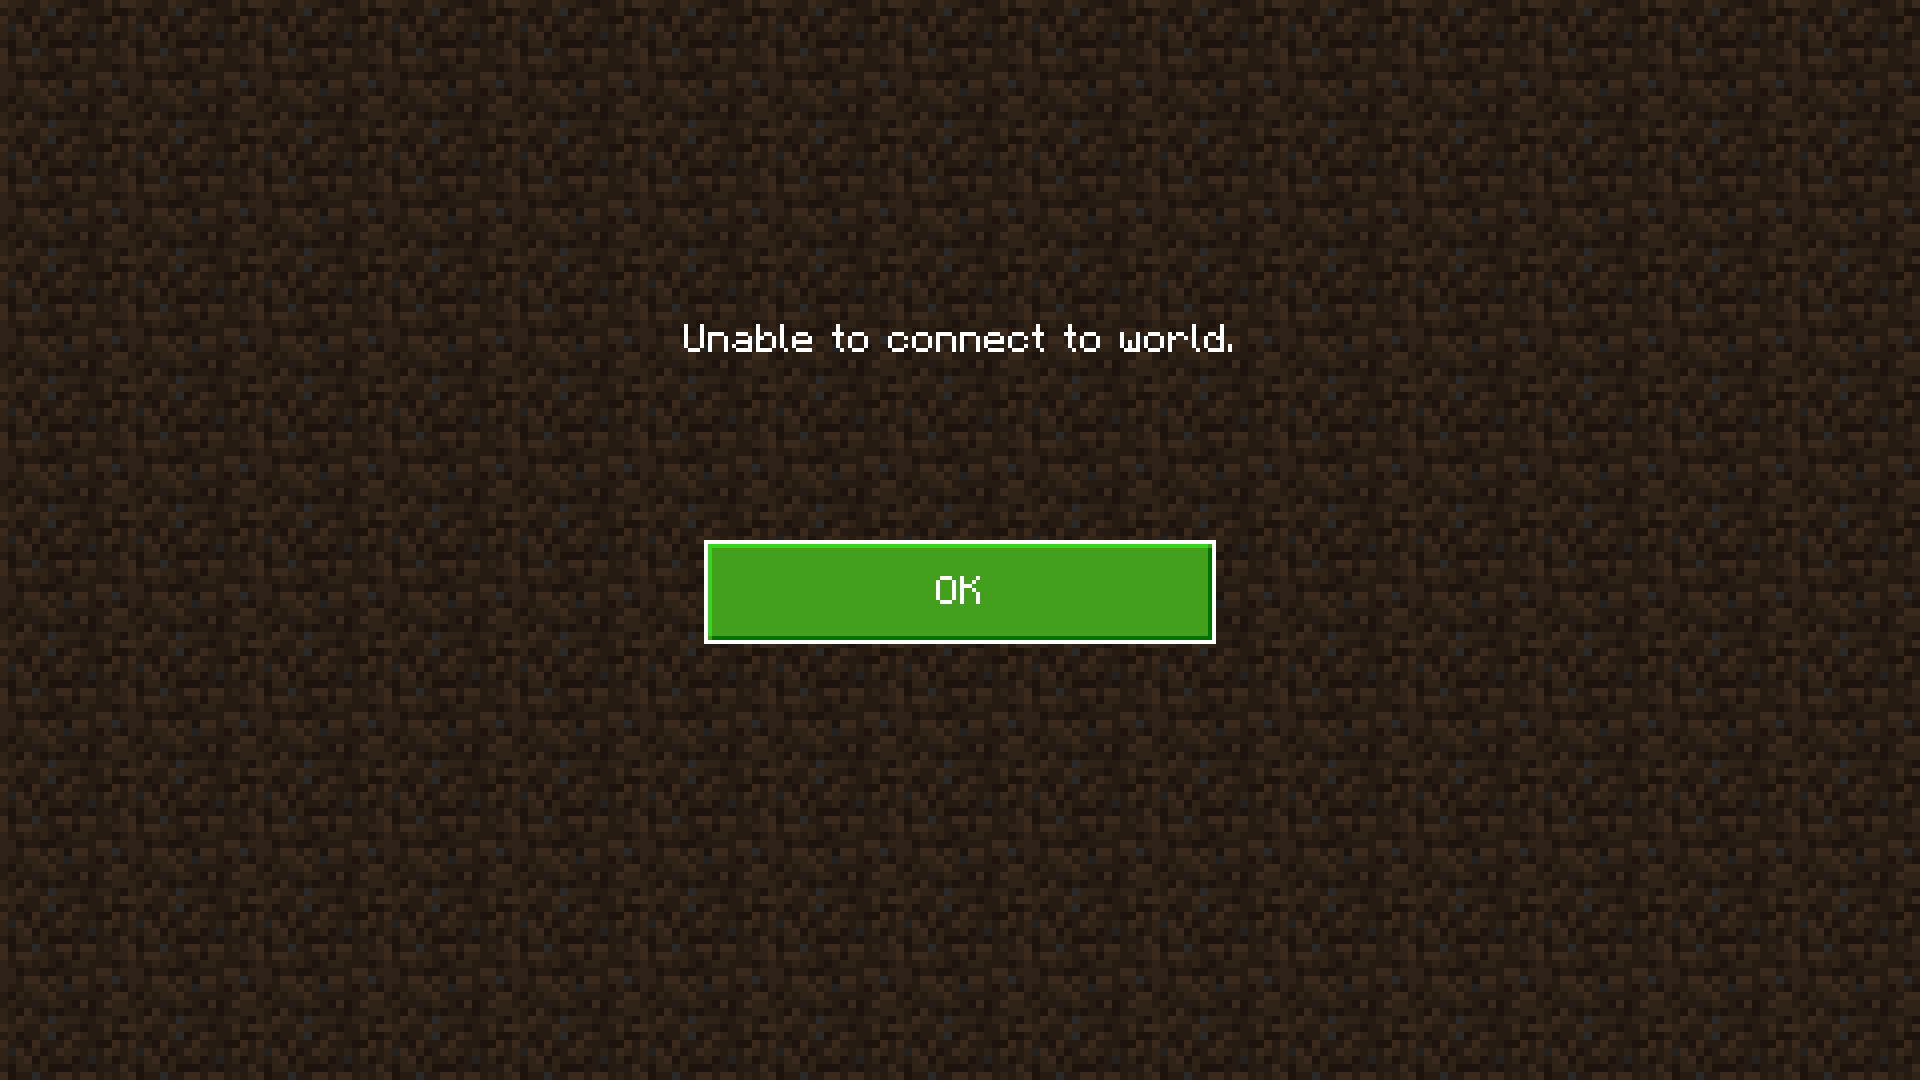 Unable to connect to world on minecraft bedrock edition, PC to PC e81a4a3e-a889-496a-9ed8-aa75fd4203e0?upload=true.png